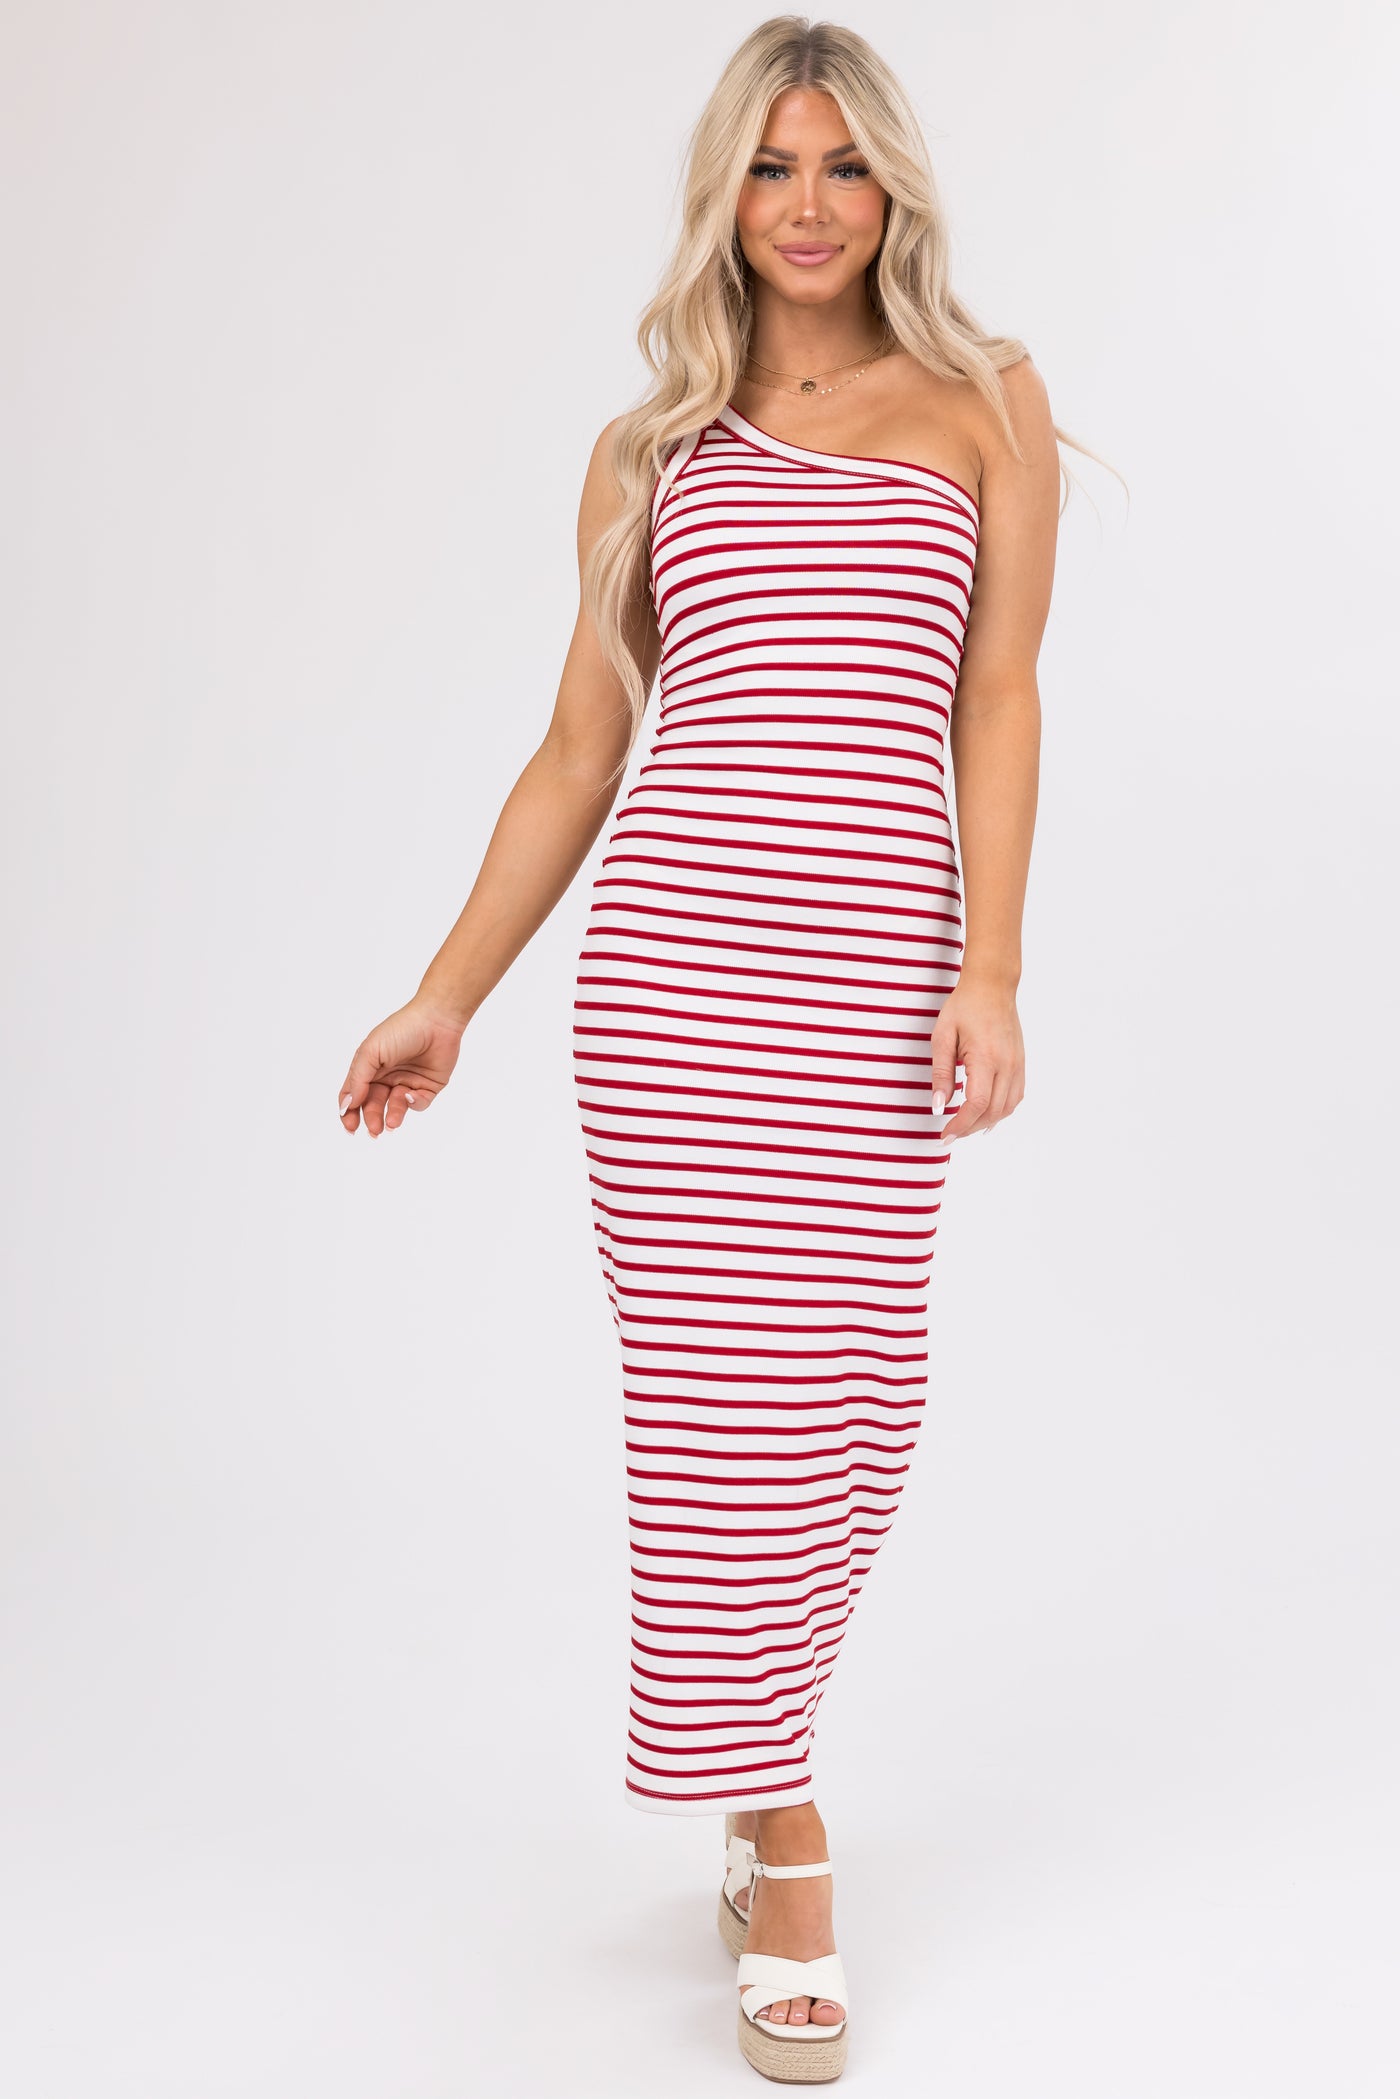 Cherry and White Striped One Shoulder Dress